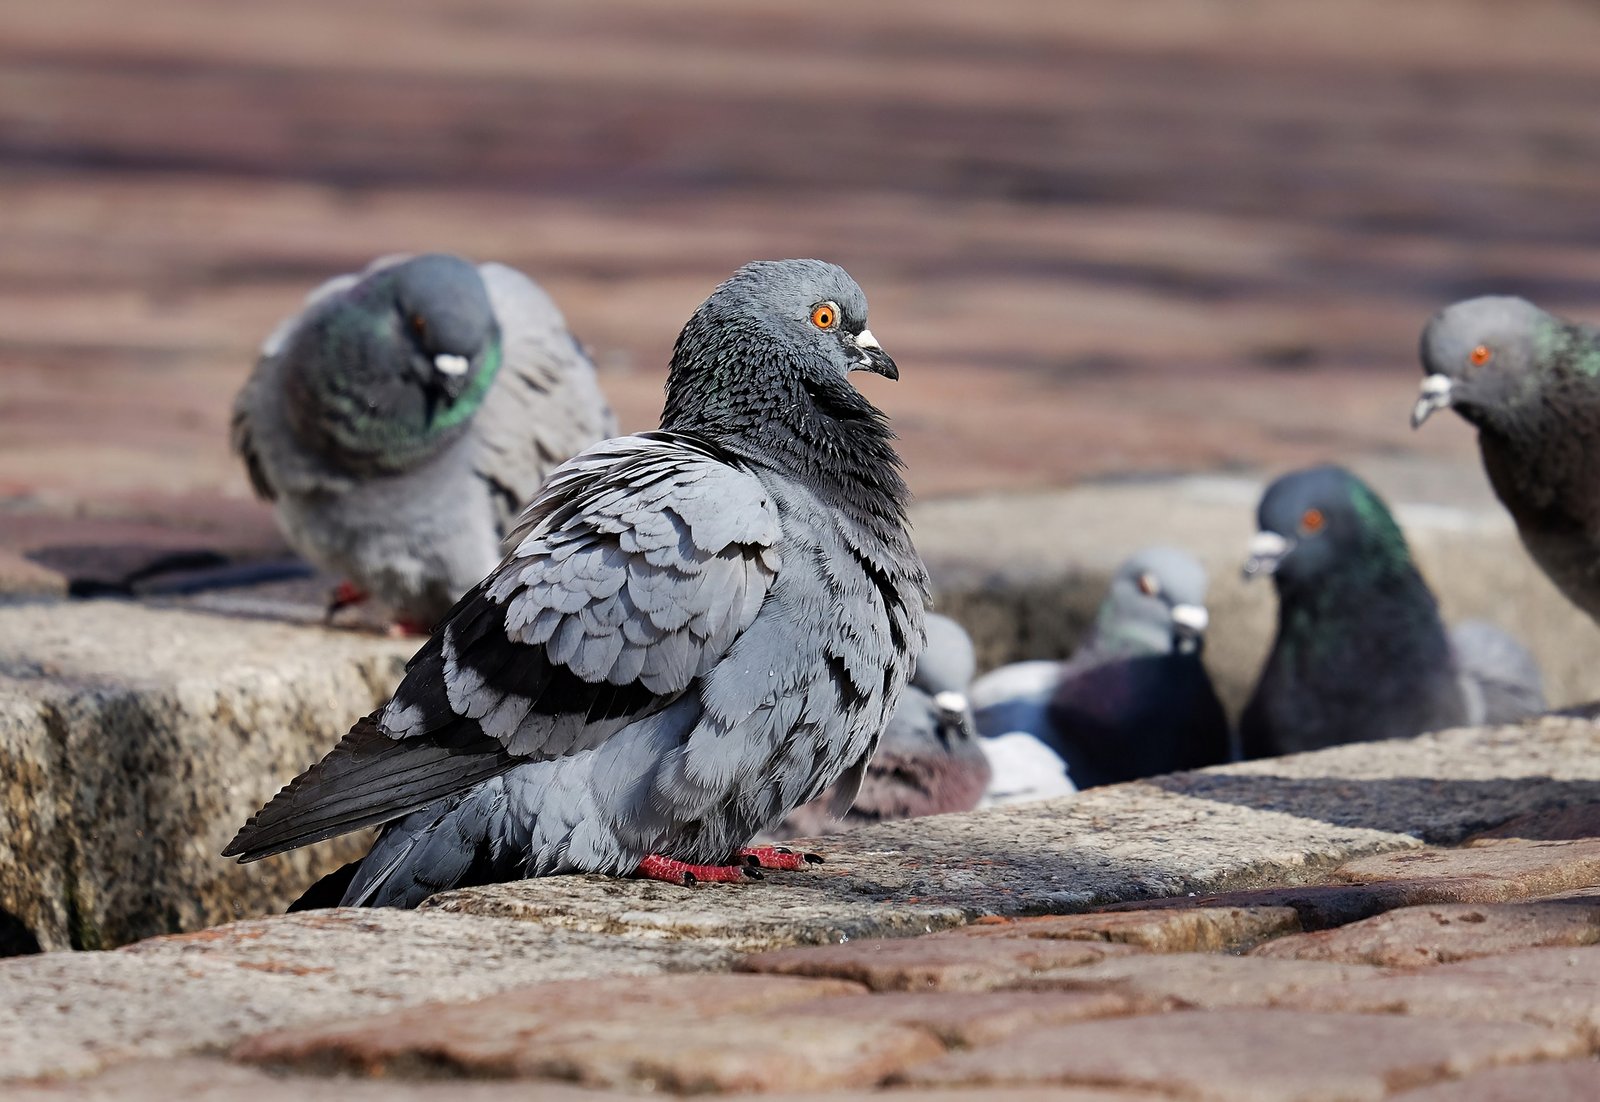 Photograph of pigeons sitting in the street